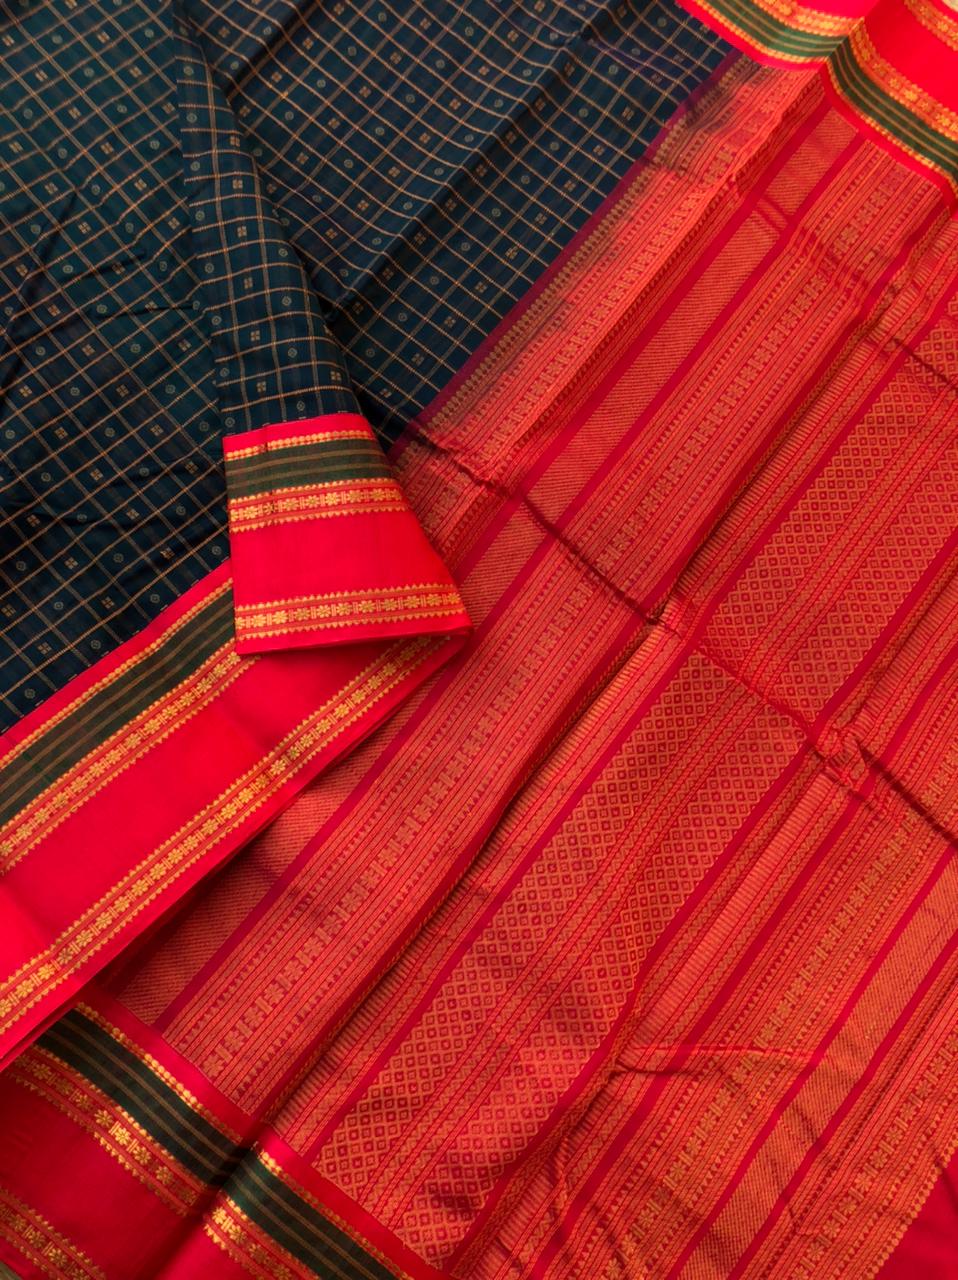 Divyam - Korvai Silk Cotton with Pure Silk Woven Borders - deep dark forest green and red Lakshadeepam